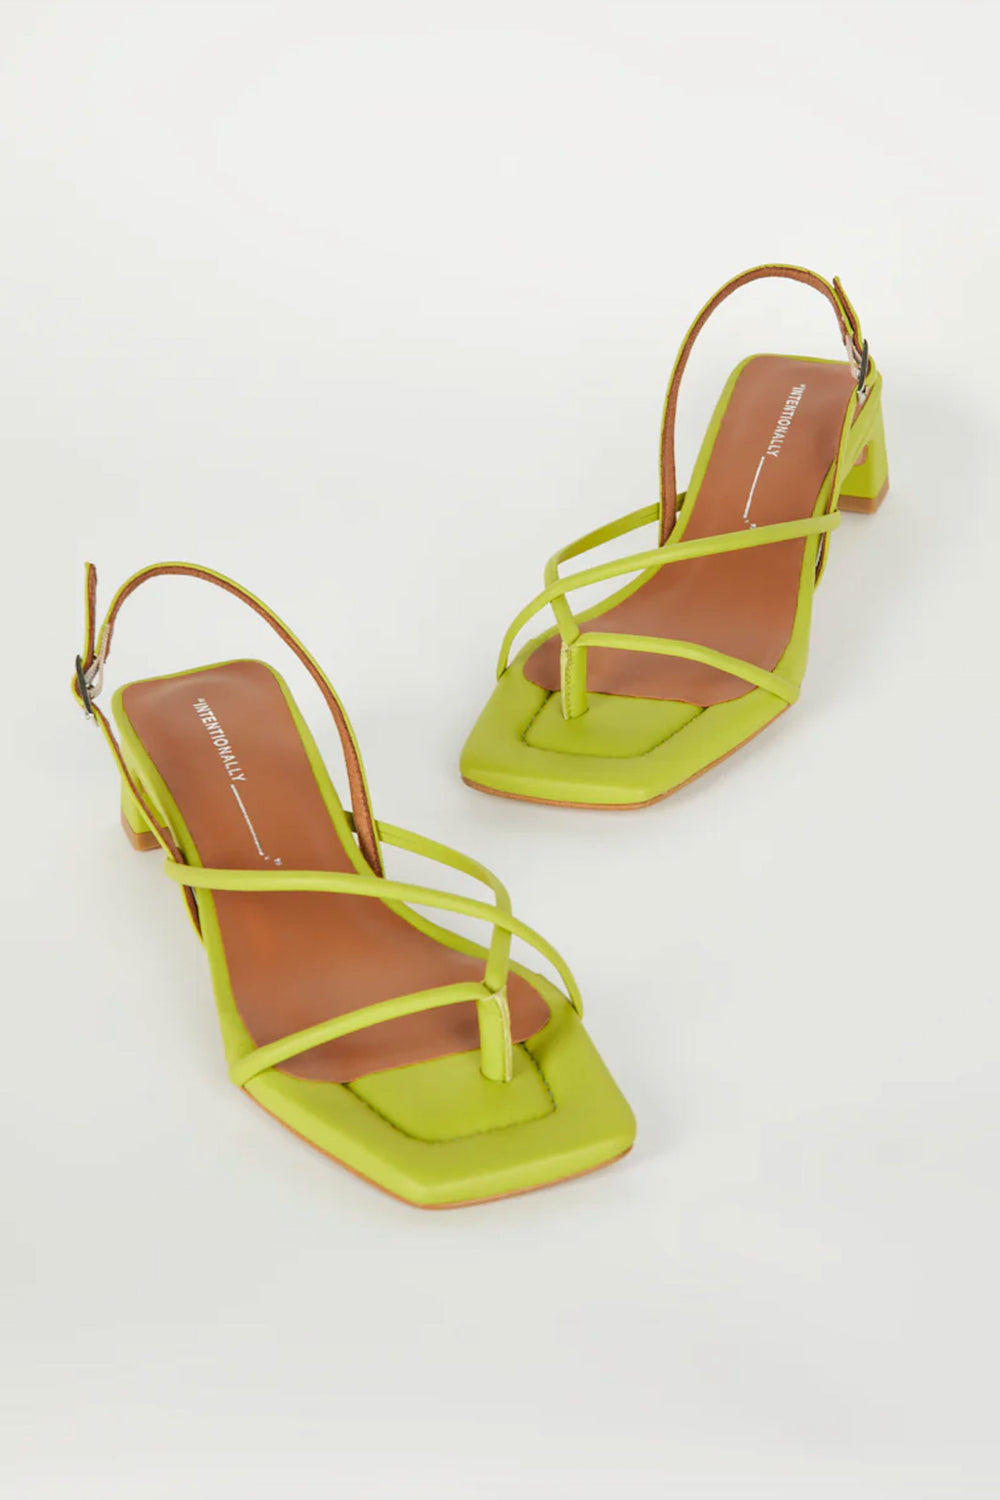 Intentionally Blank Fifi Heel in Neon Citrus - Whimsy & Row